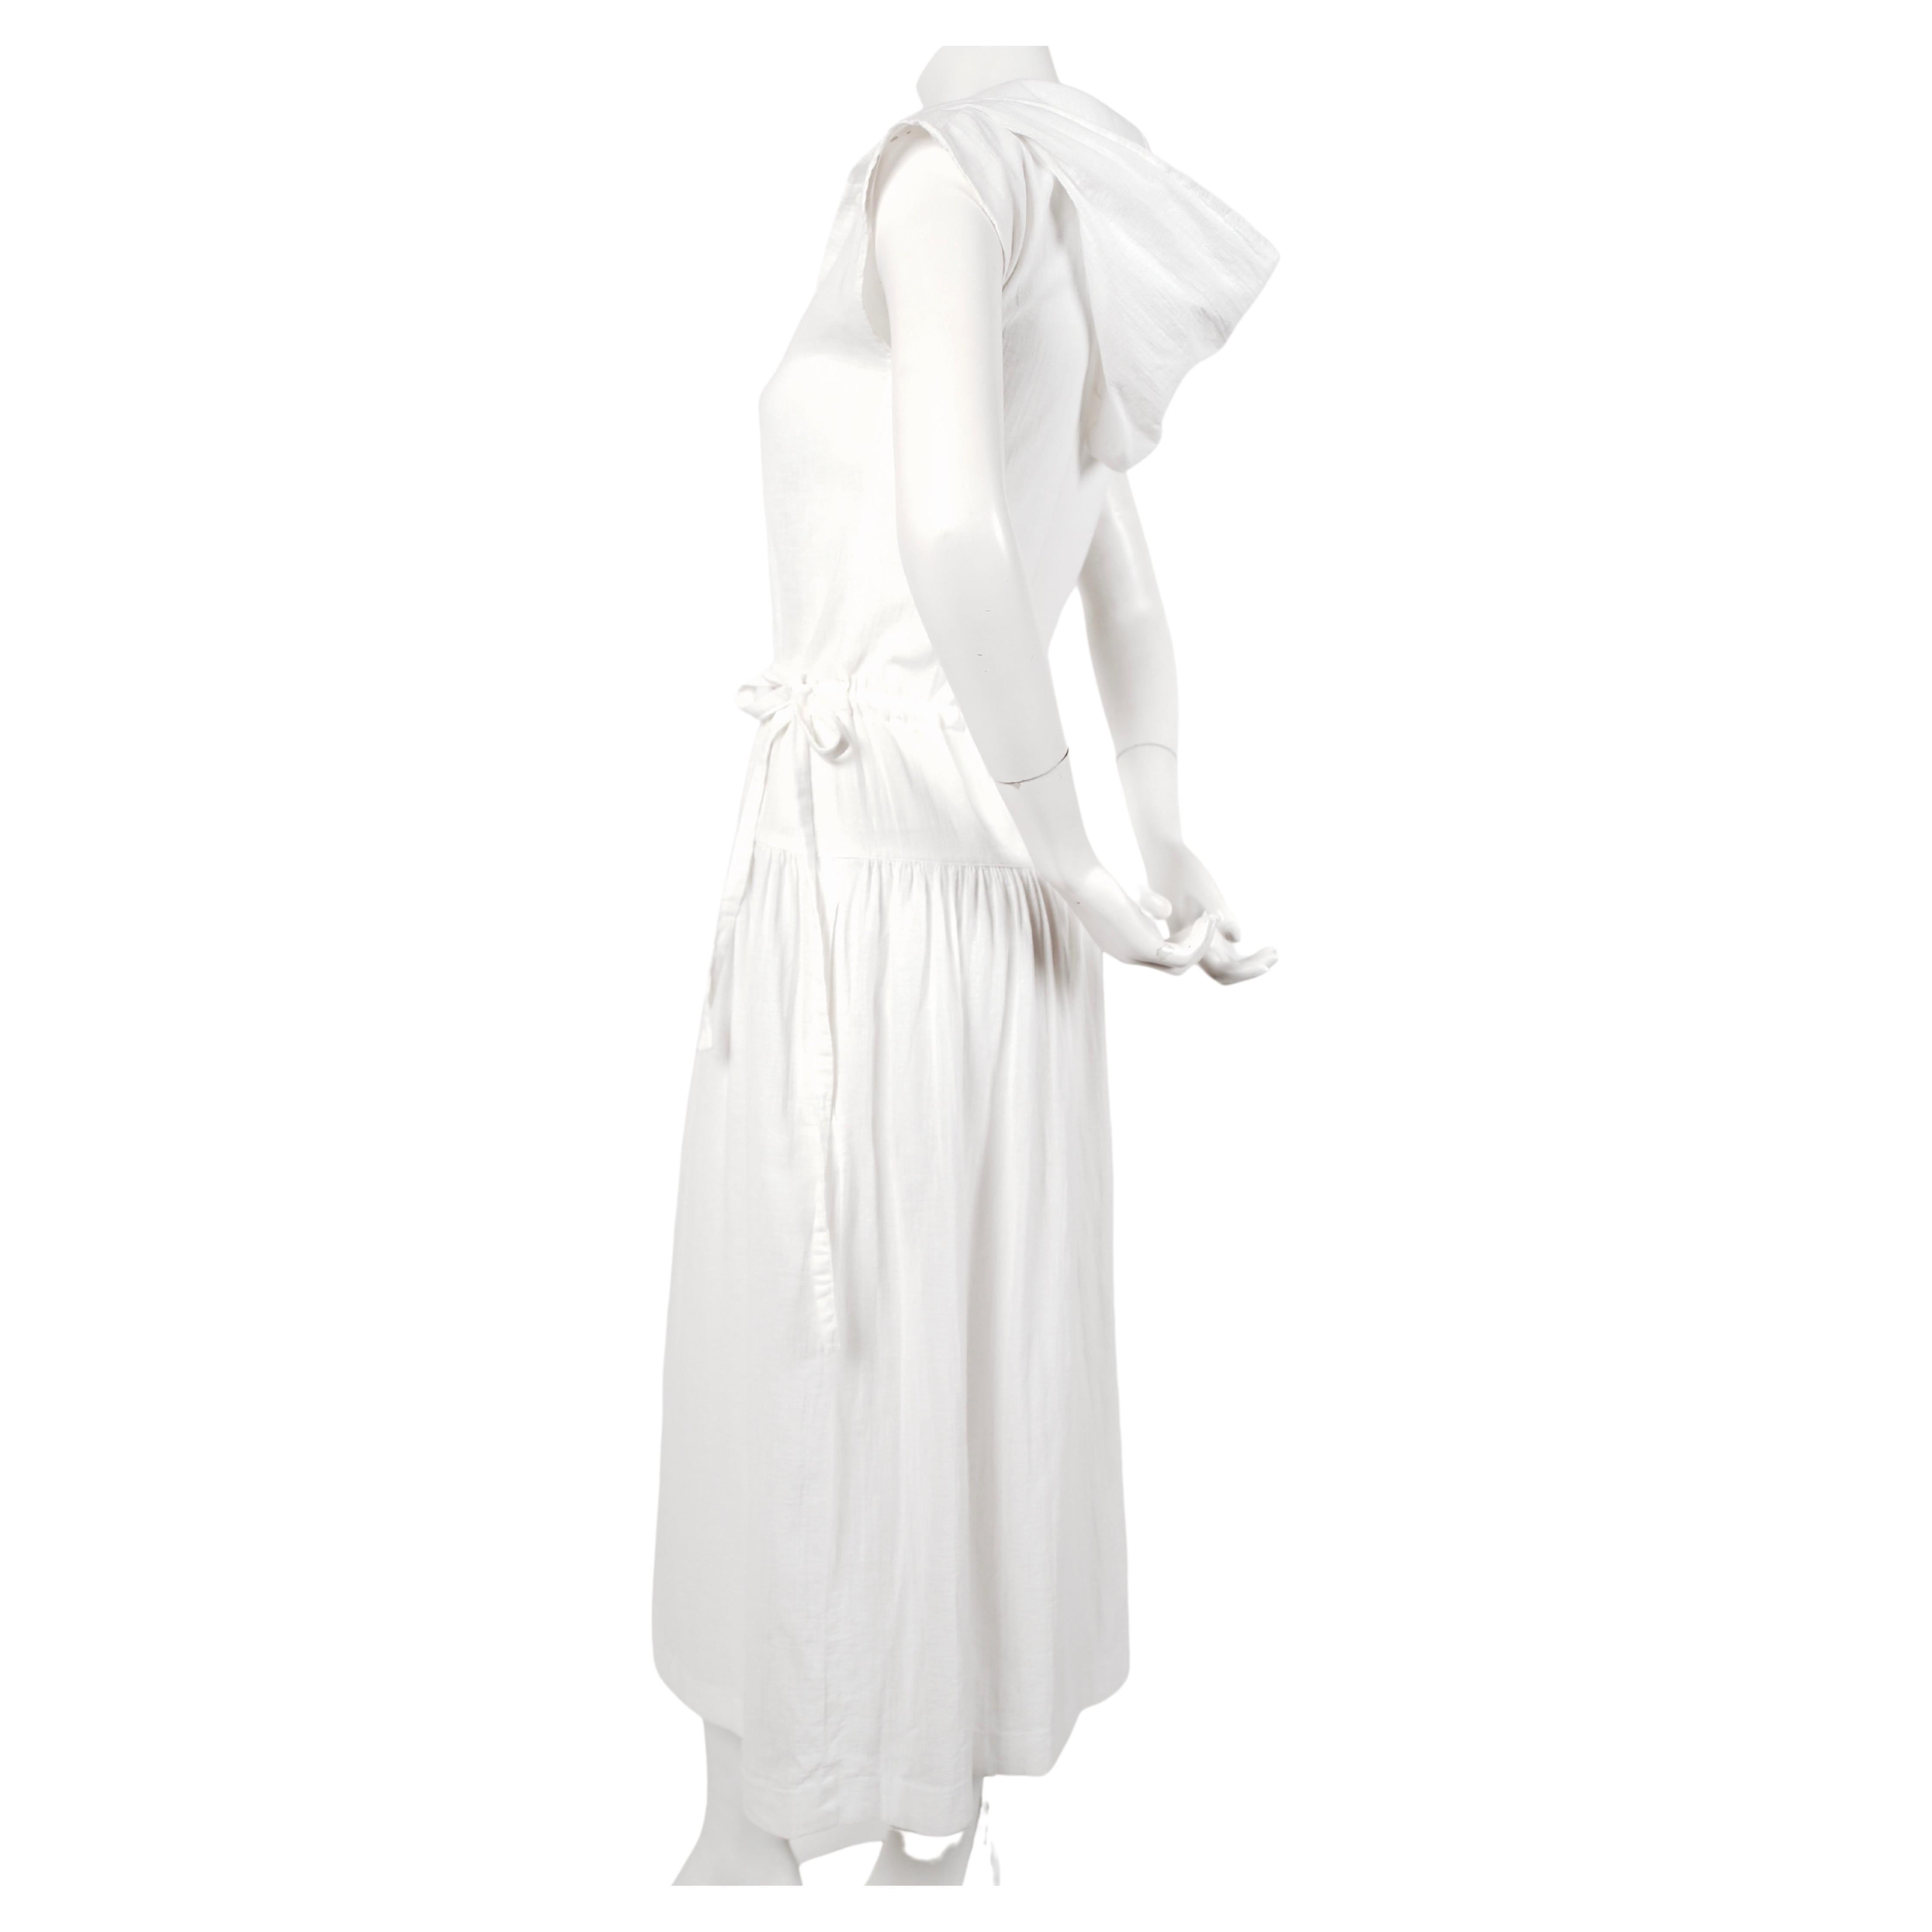 White gauze dress, with asymmetrical front pocket, drawstring waist, cap-sleeves and hood designed by Cacharel dating to the late 1970's. Labeled a FR 38 however this would best fit a FR 34-36 or US 2. Approximate measurements: Bust 31-32